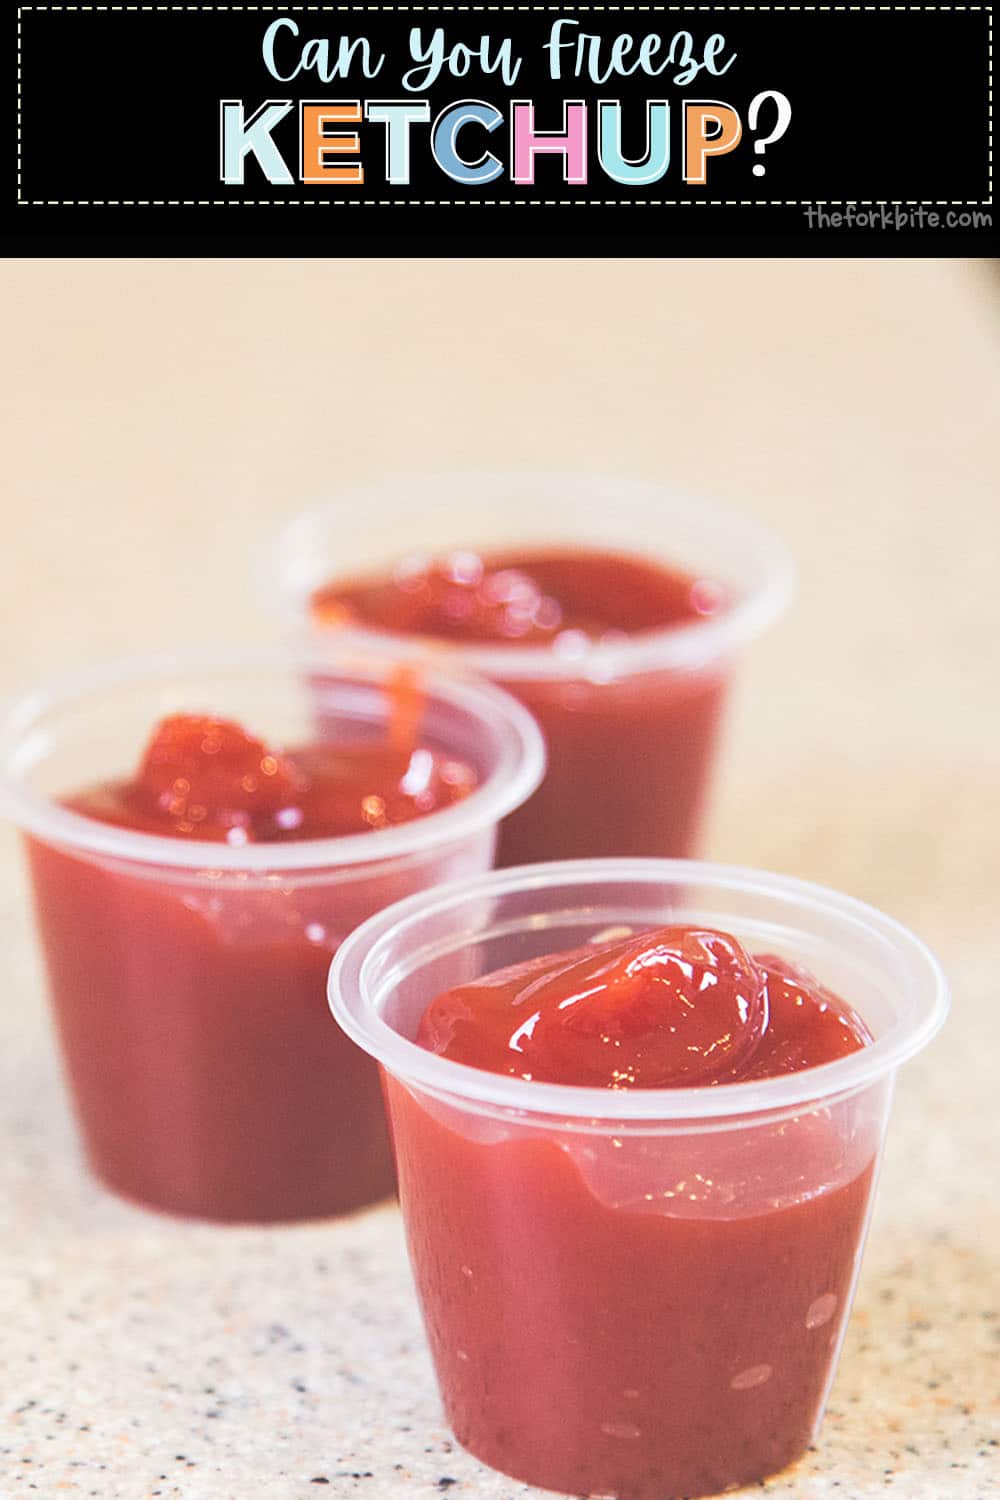 You can freeze ketchup in a sealed bottle, transfer it to a different airtight container, or freeze it in small portion-sized cubes in your fridge’s ice cube tray.